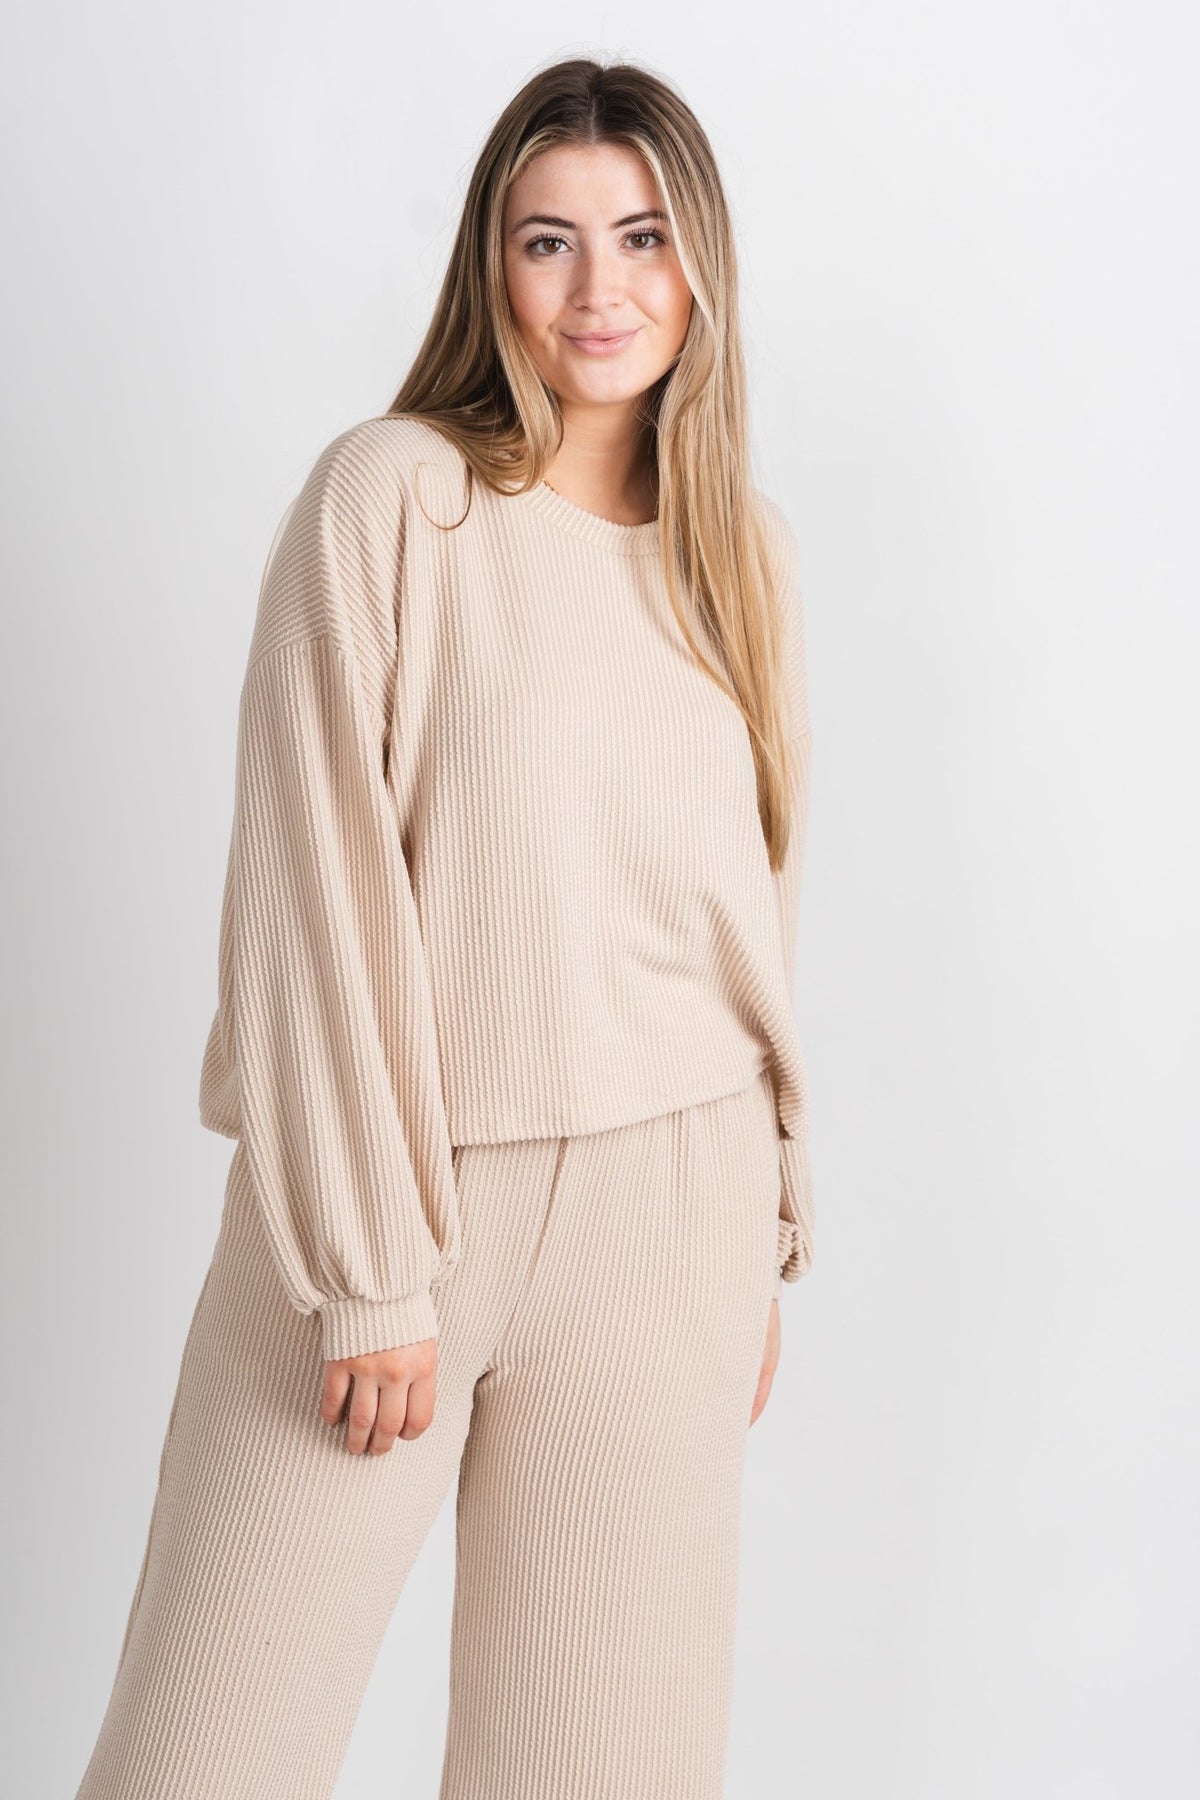 Manifest ribbed top taupe - Trendy Top - Cute Loungewear Collection at Lush Fashion Lounge Boutique in Oklahoma City